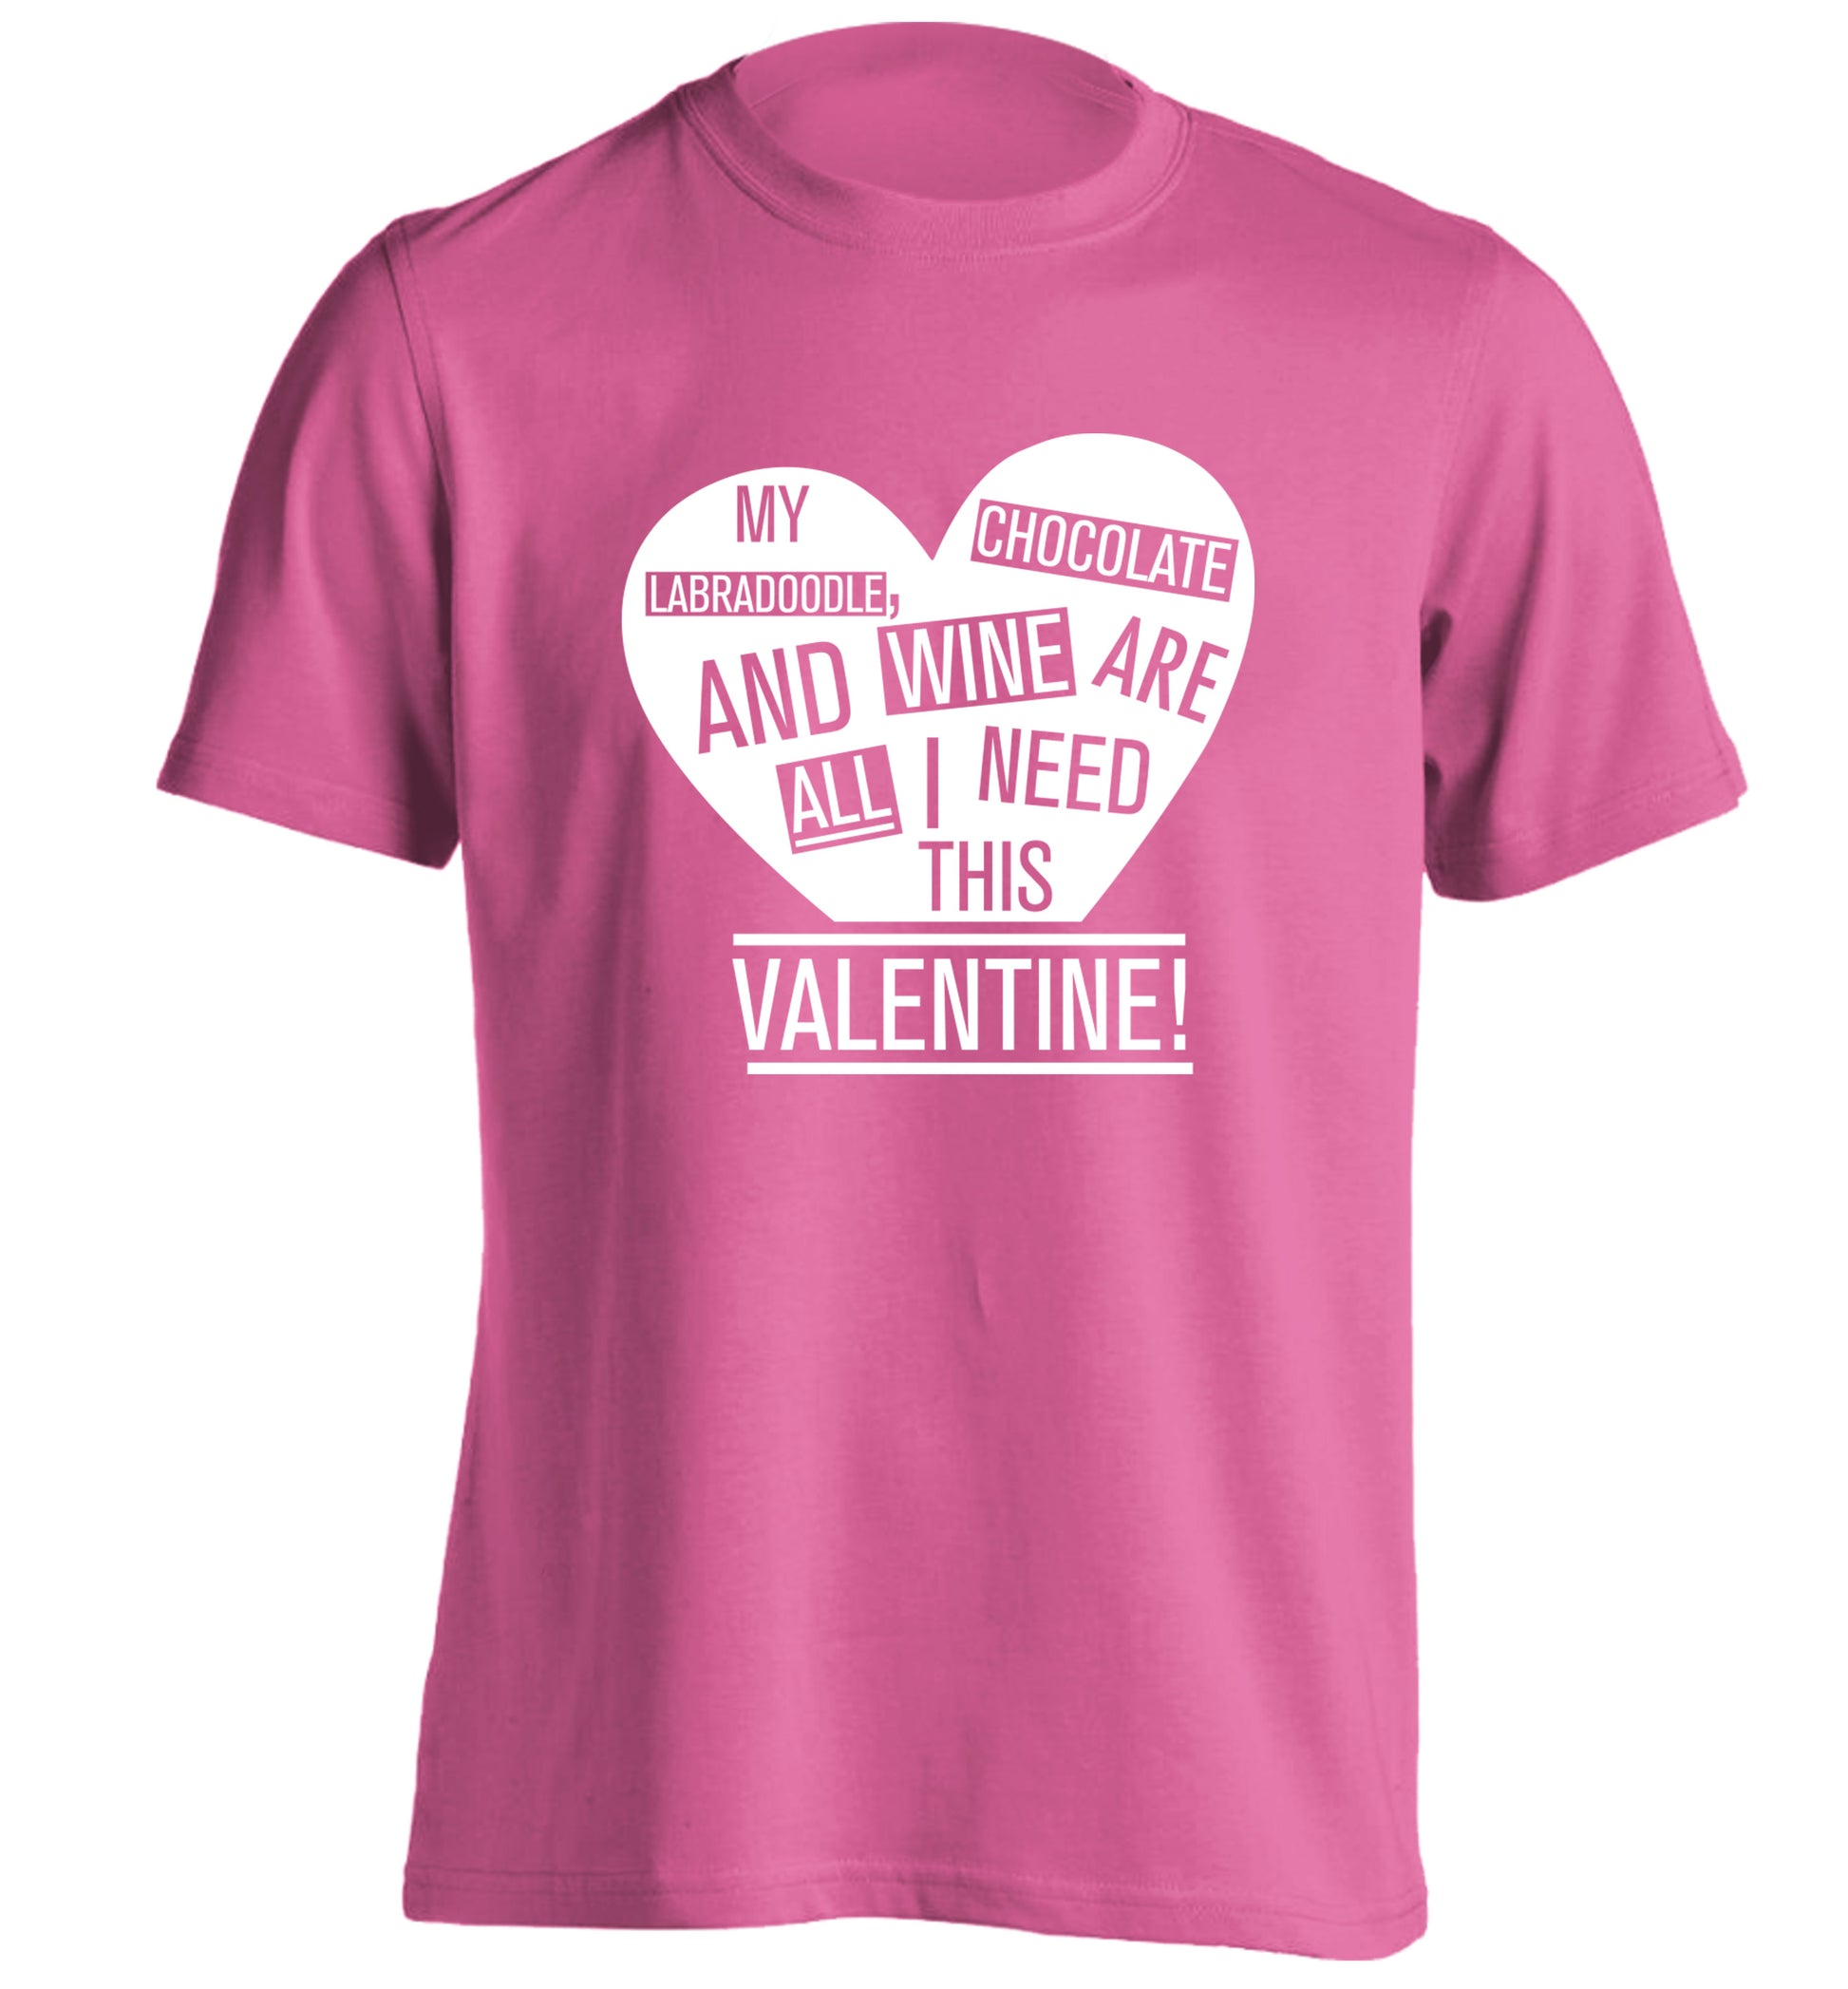 My labradoodle, chocolate and wine are all I need this valentine! adults unisex pink Tshirt 2XL